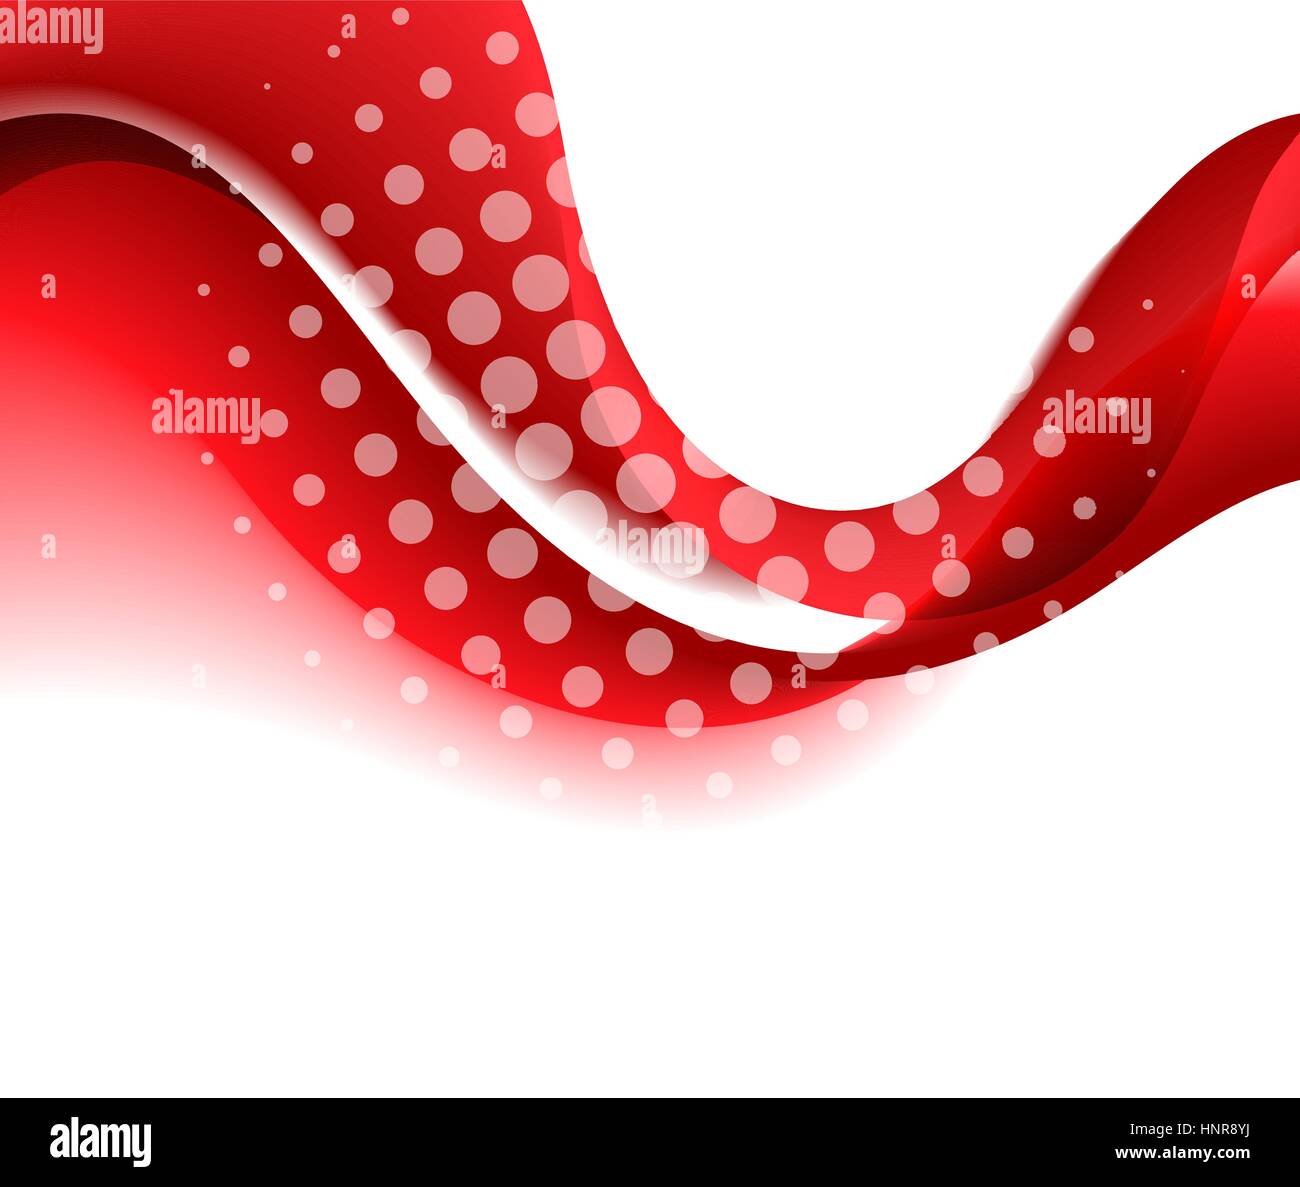 Abstract Blue Curve Vector Background Free Vector - Web Design Hot